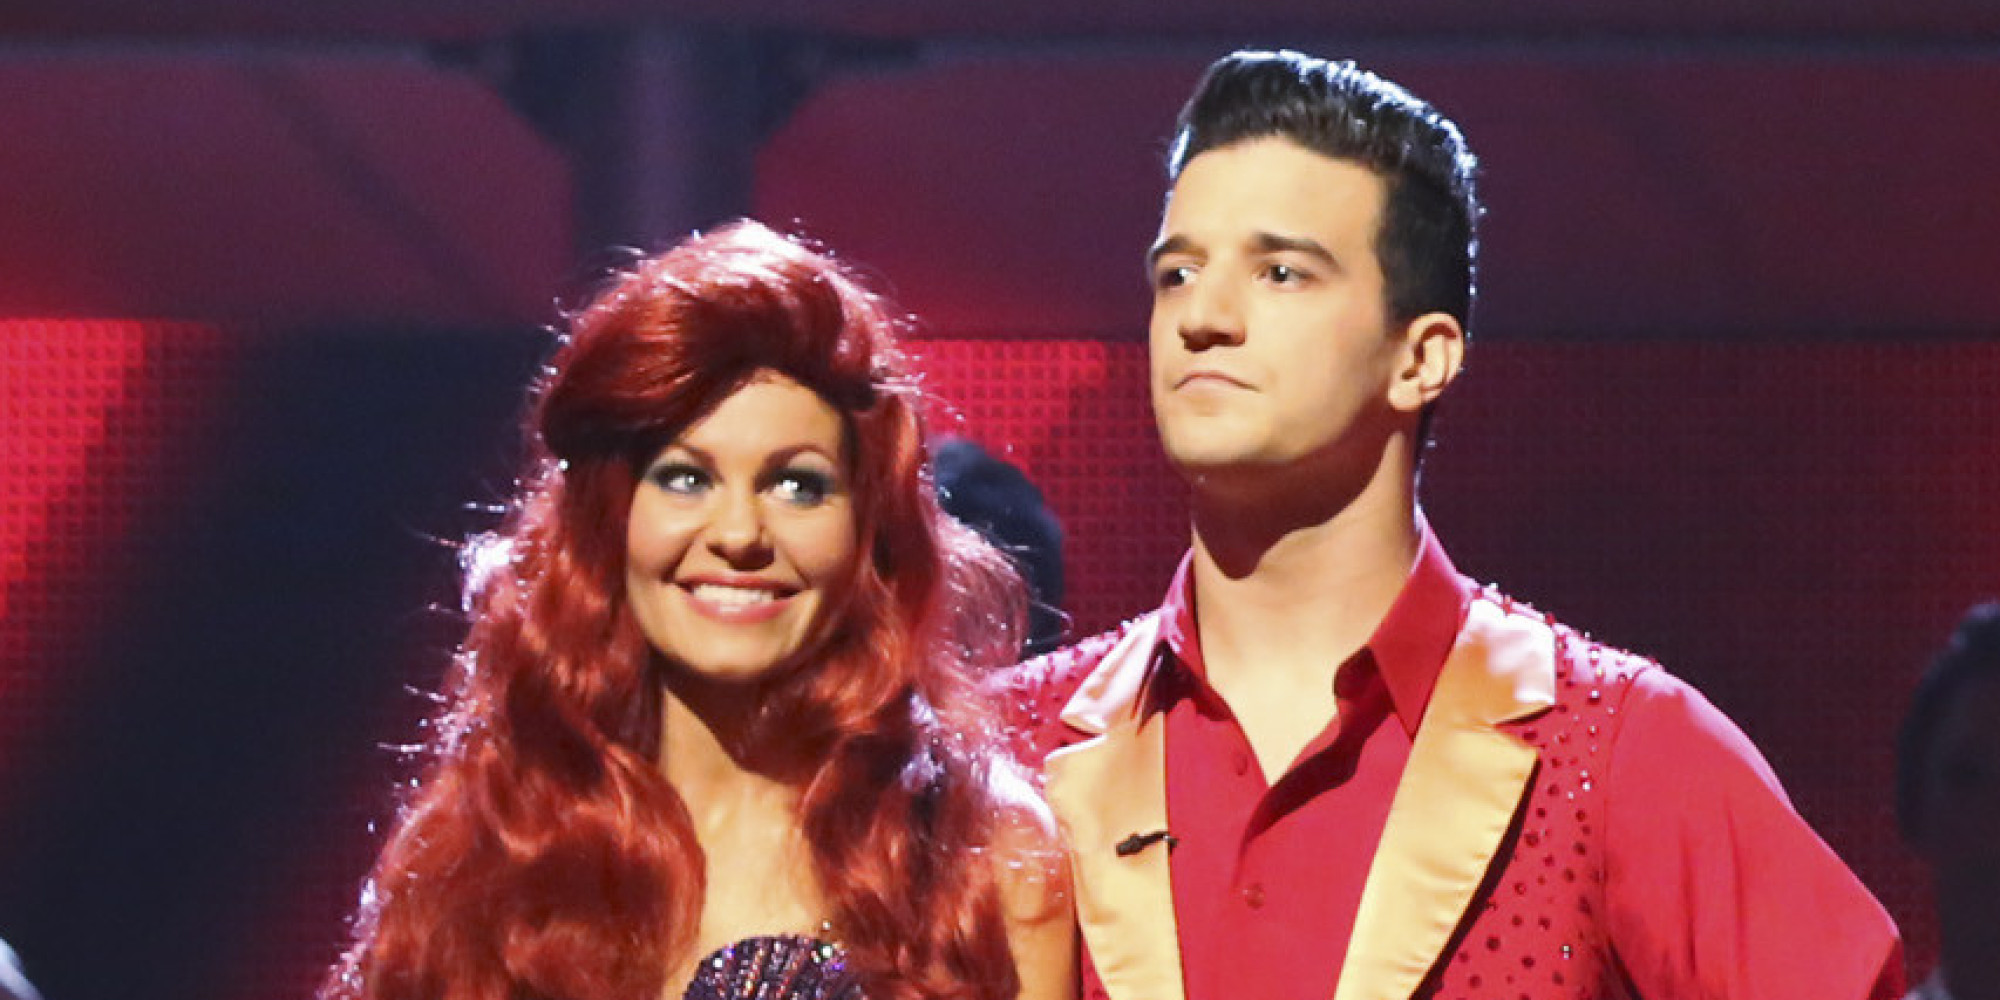 Candace Cameron Bure Dresses Up As Ariel The Little Mermaid On Dancing